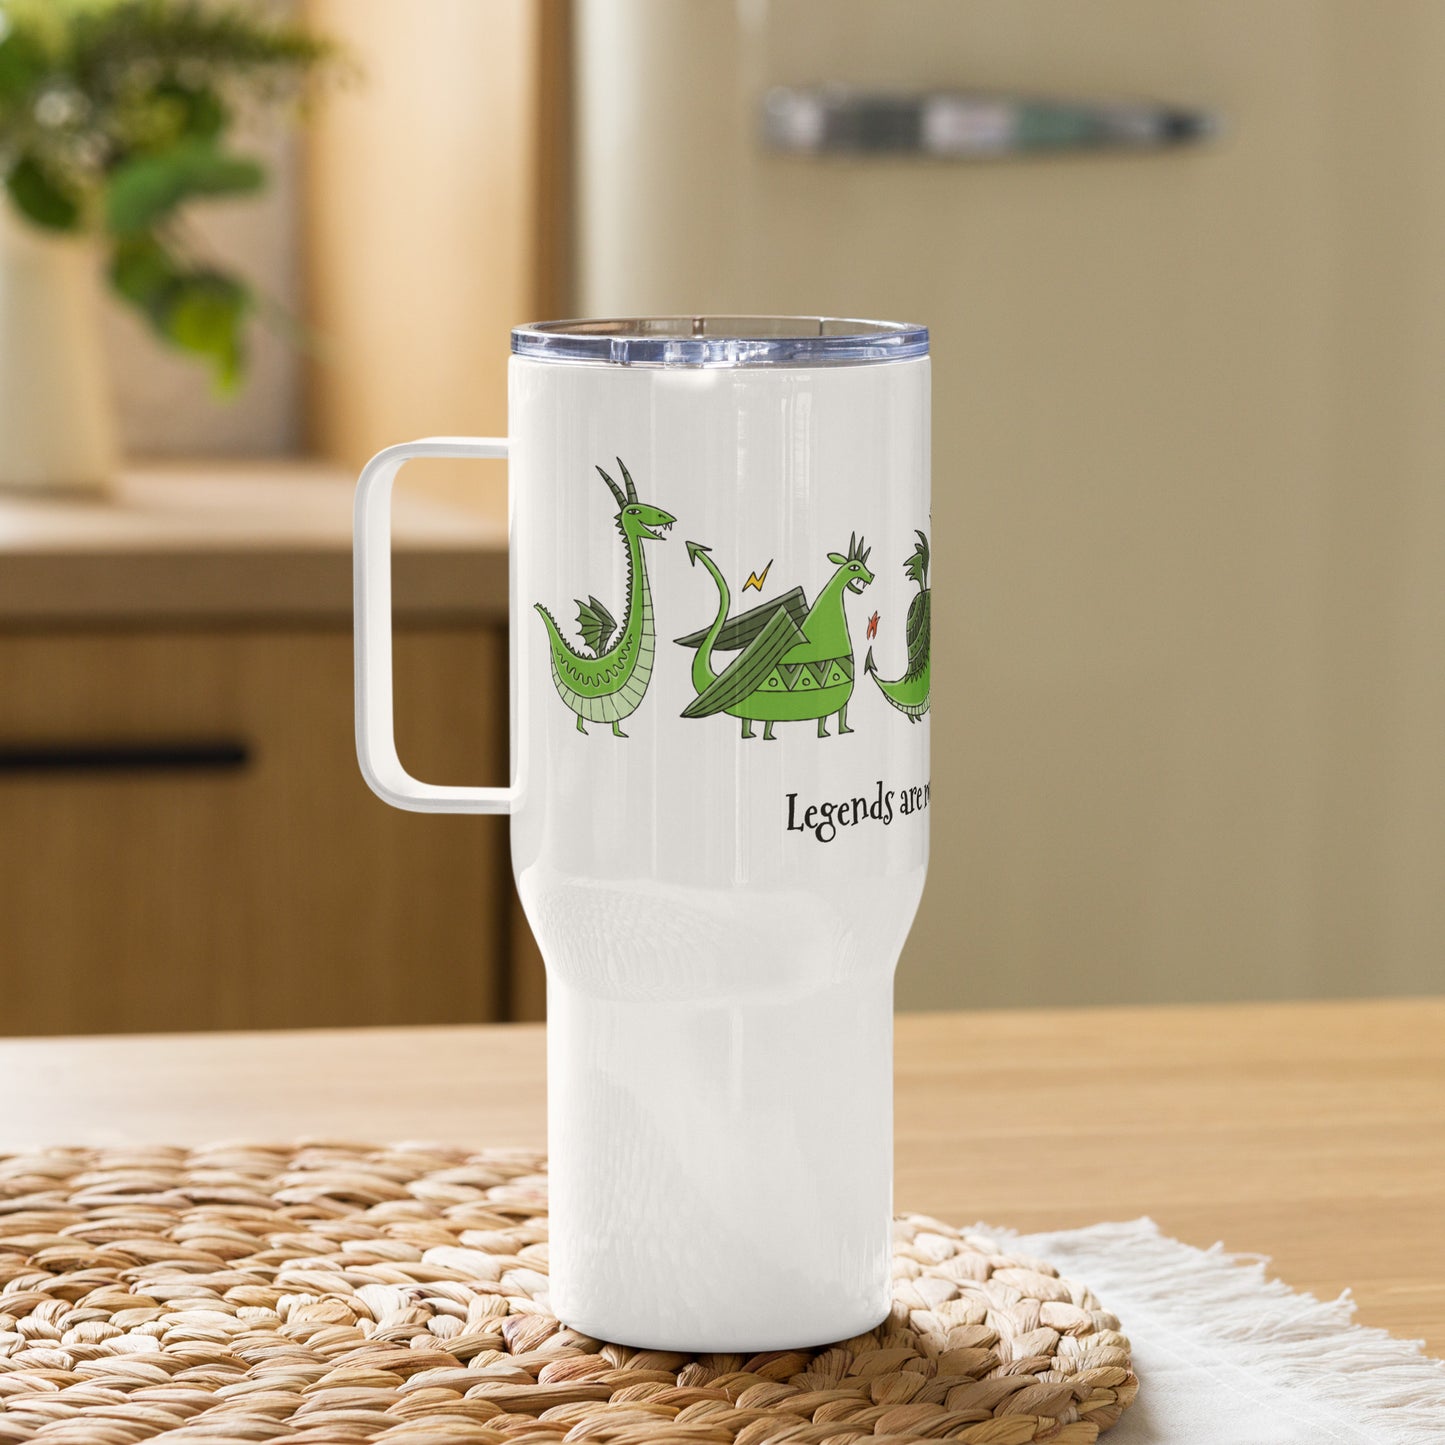 Personalised Travel mug with a handle. Funny Green Dragons print.